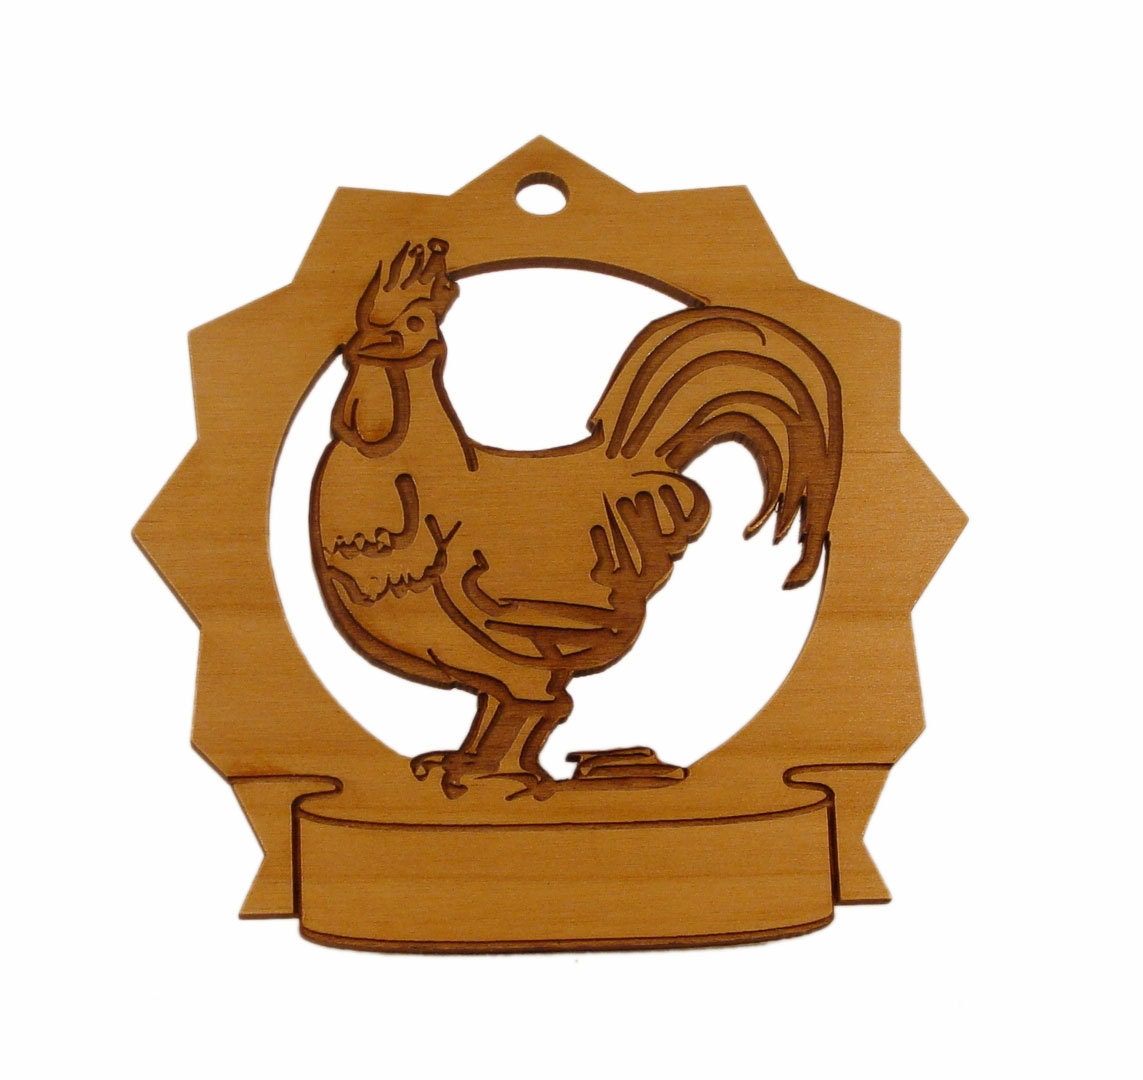 Rooster Personalized Ornament - gclasergraphics